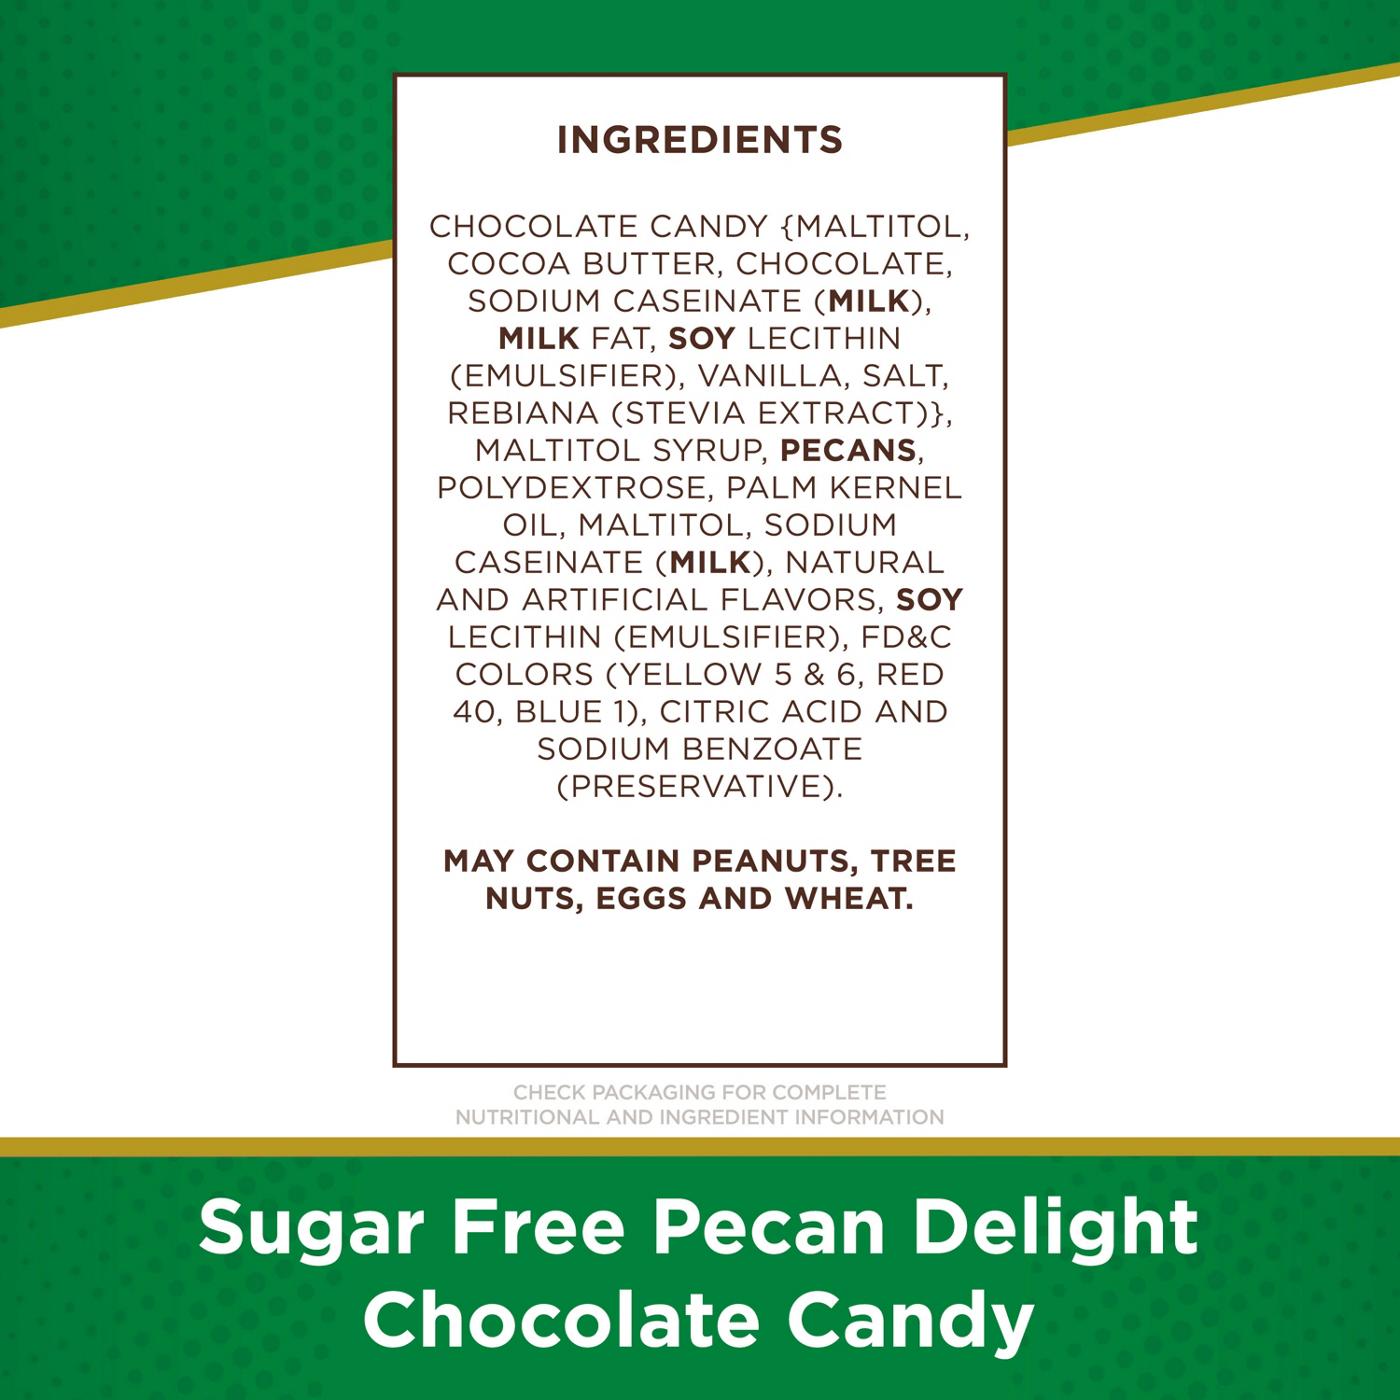 Russell Stover Sugar Free Pecan Delights; image 5 of 8